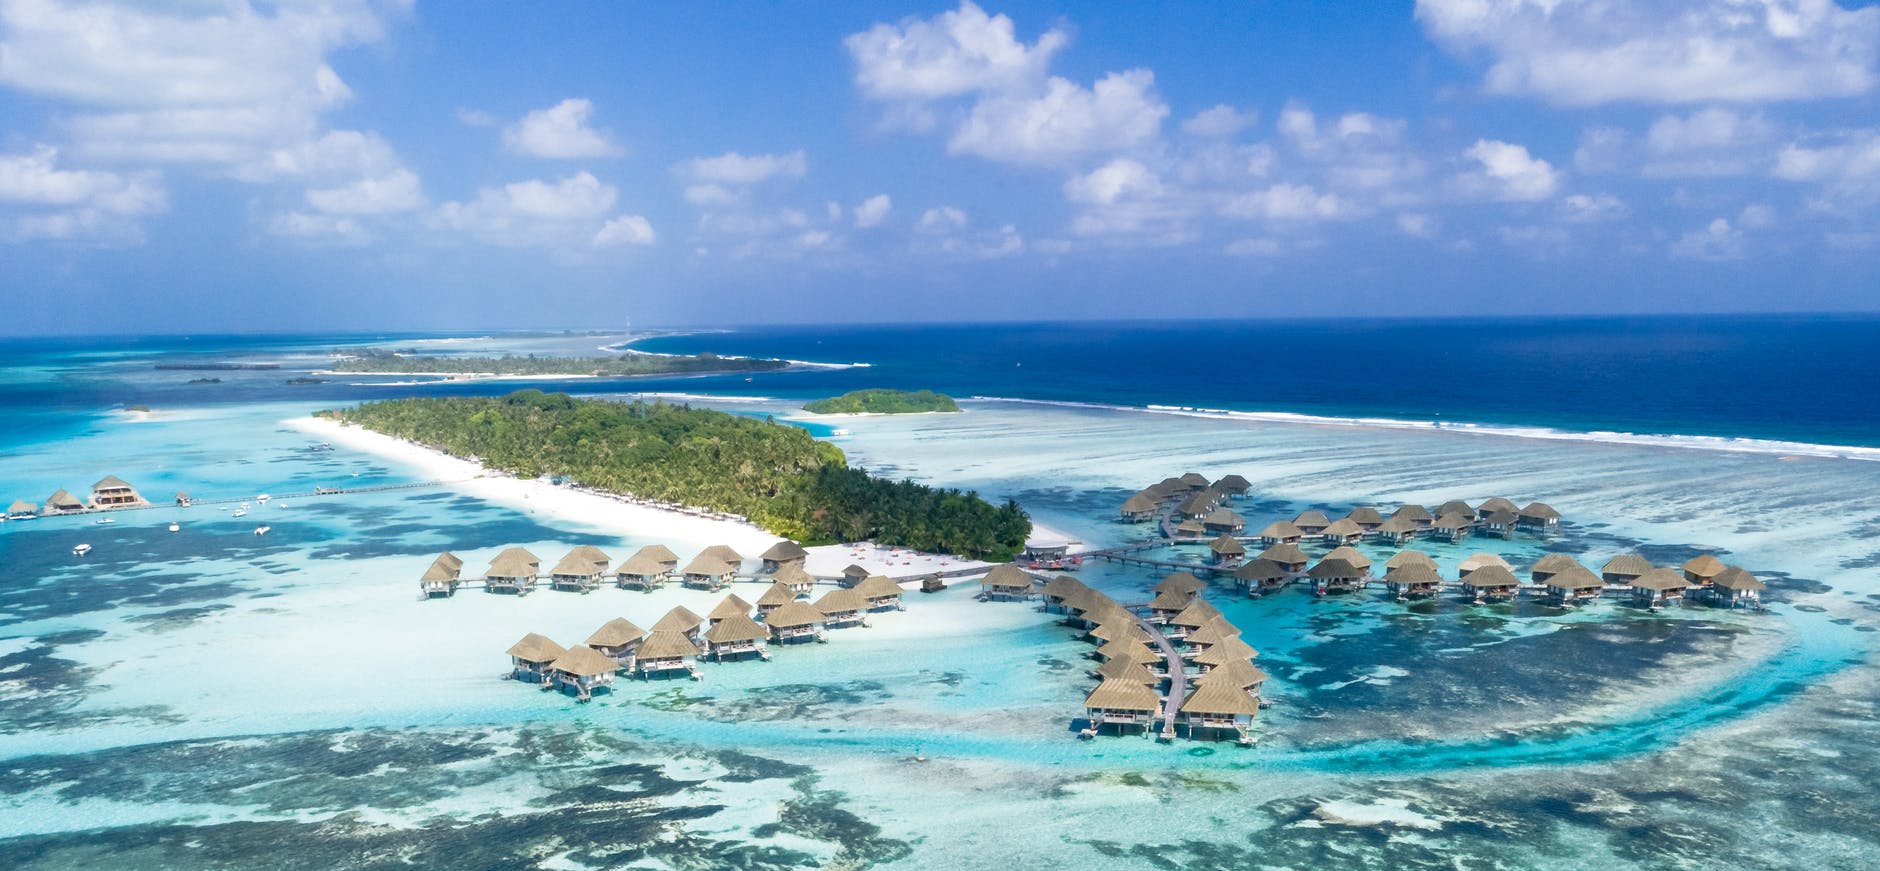 When is the best time to travel to the Maldives?